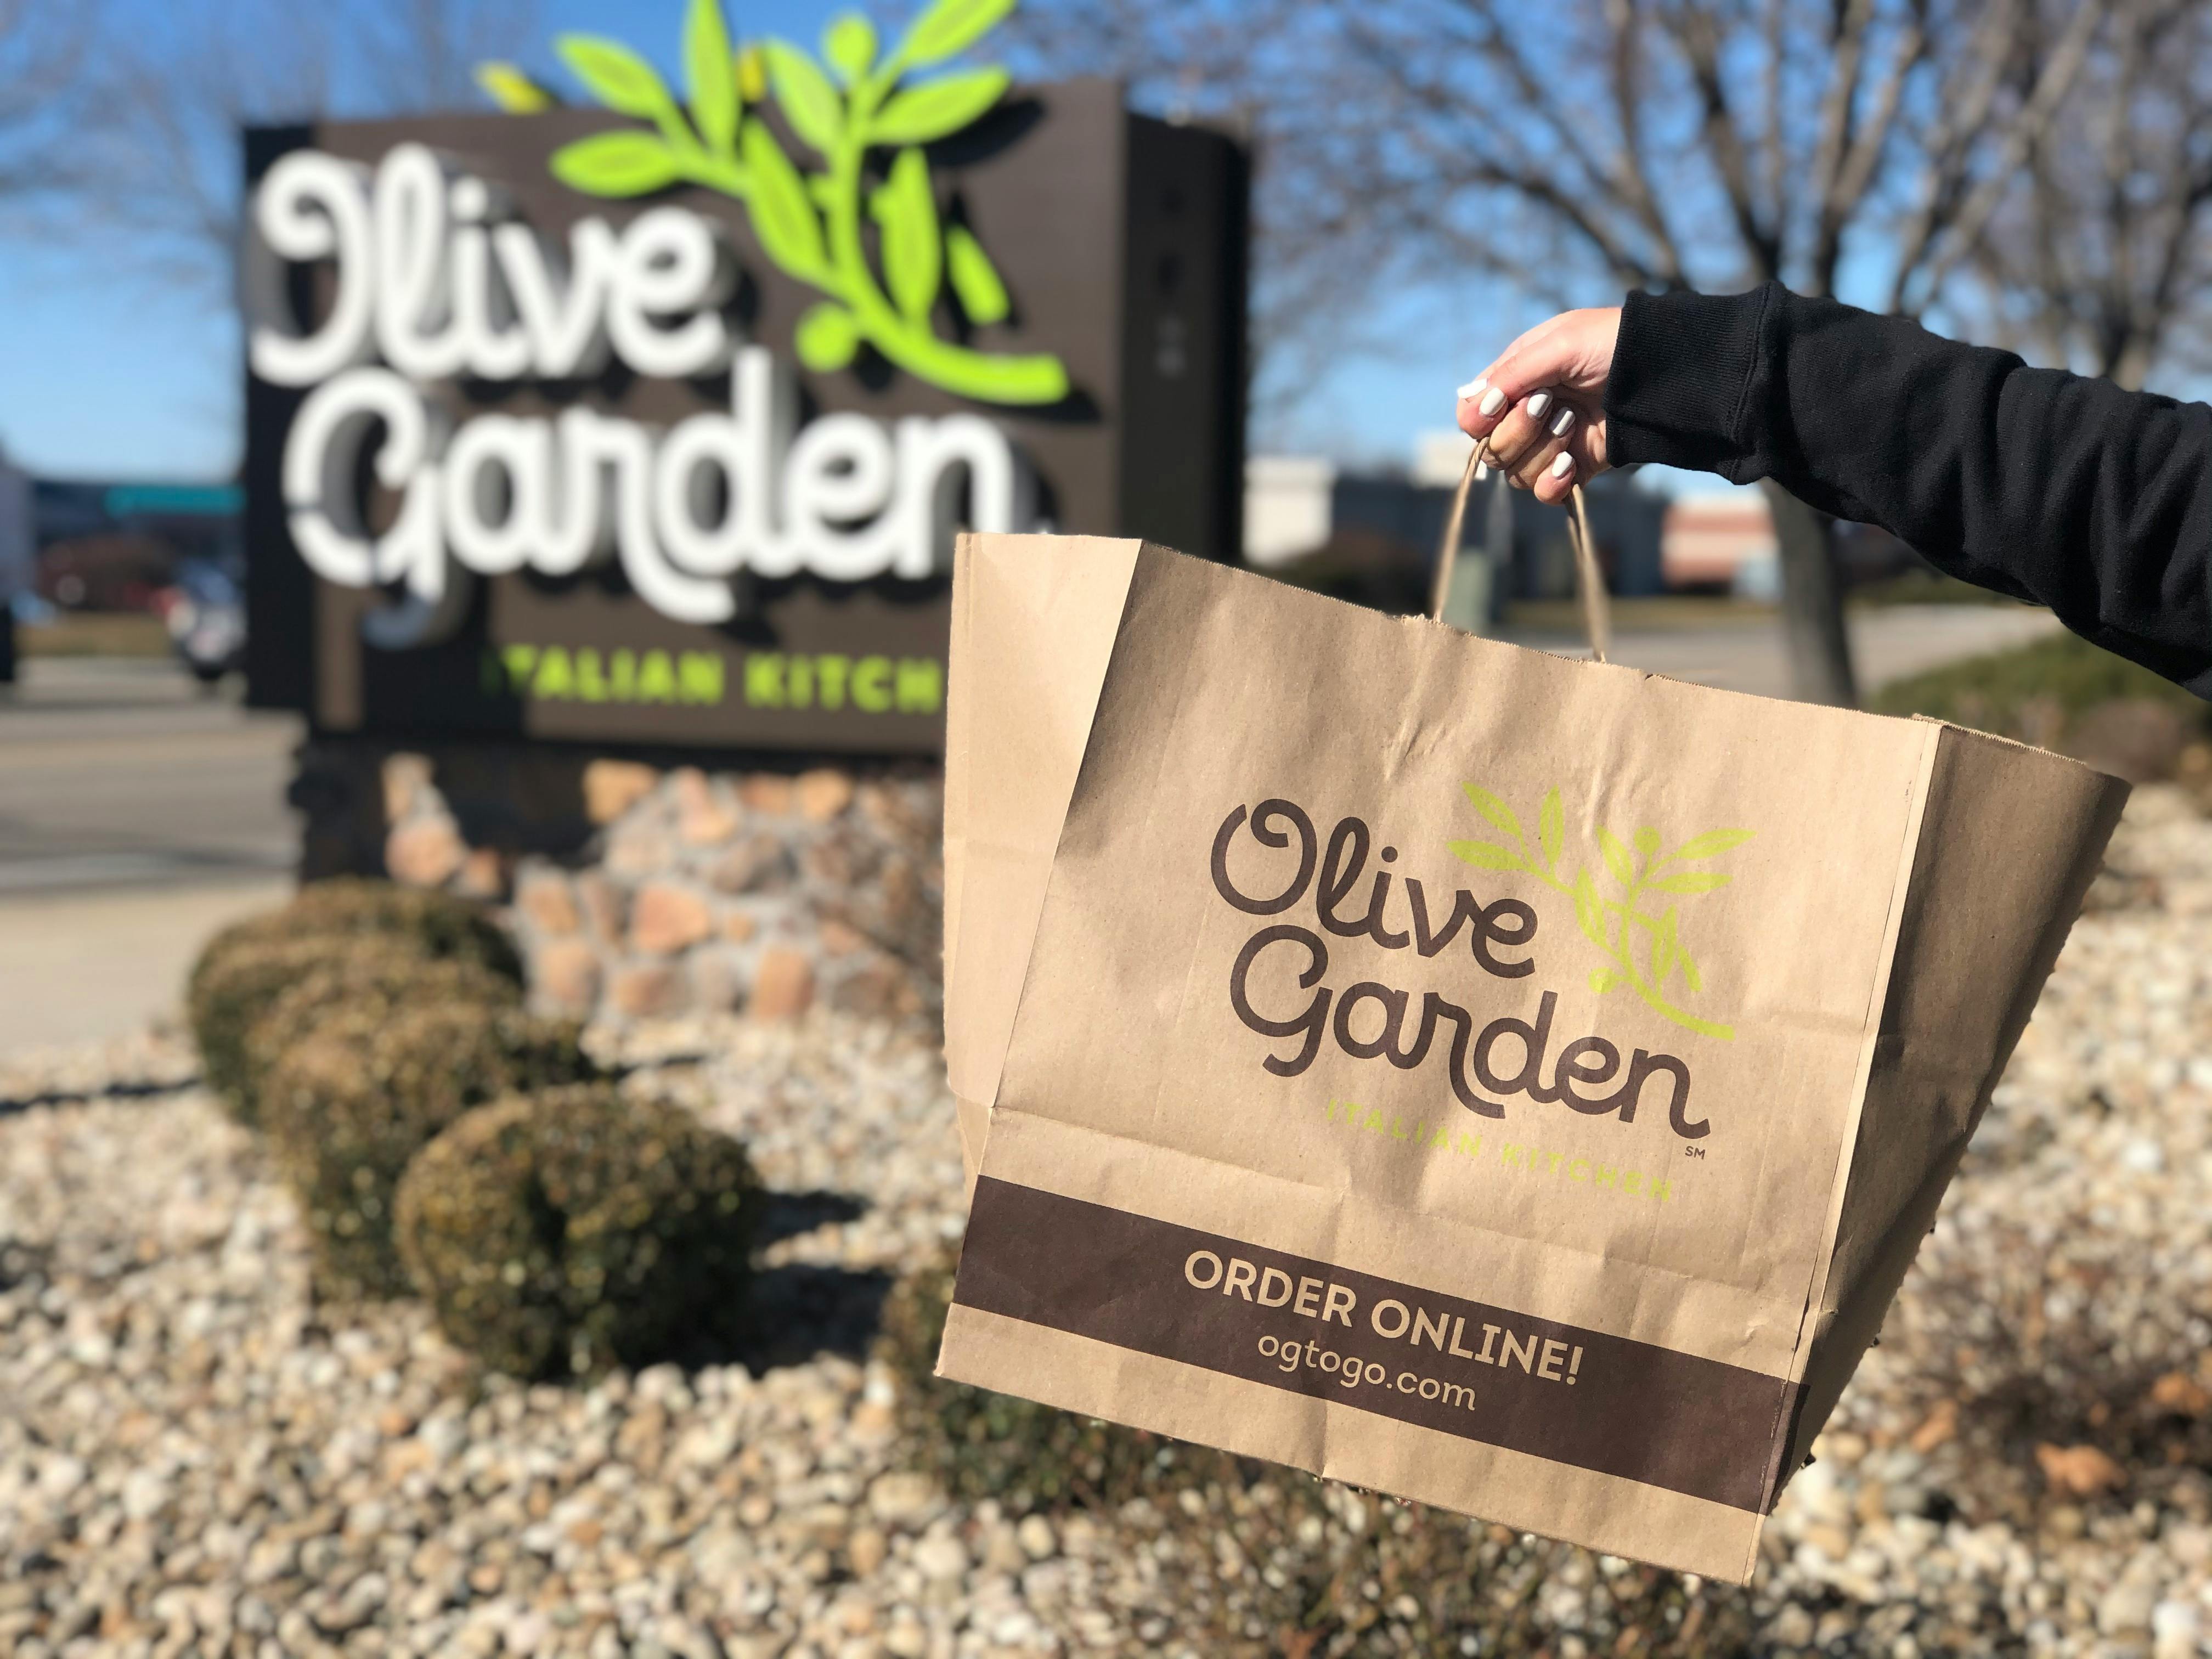 a bag of to go olive garden being held out in front of outside olive garden sign 